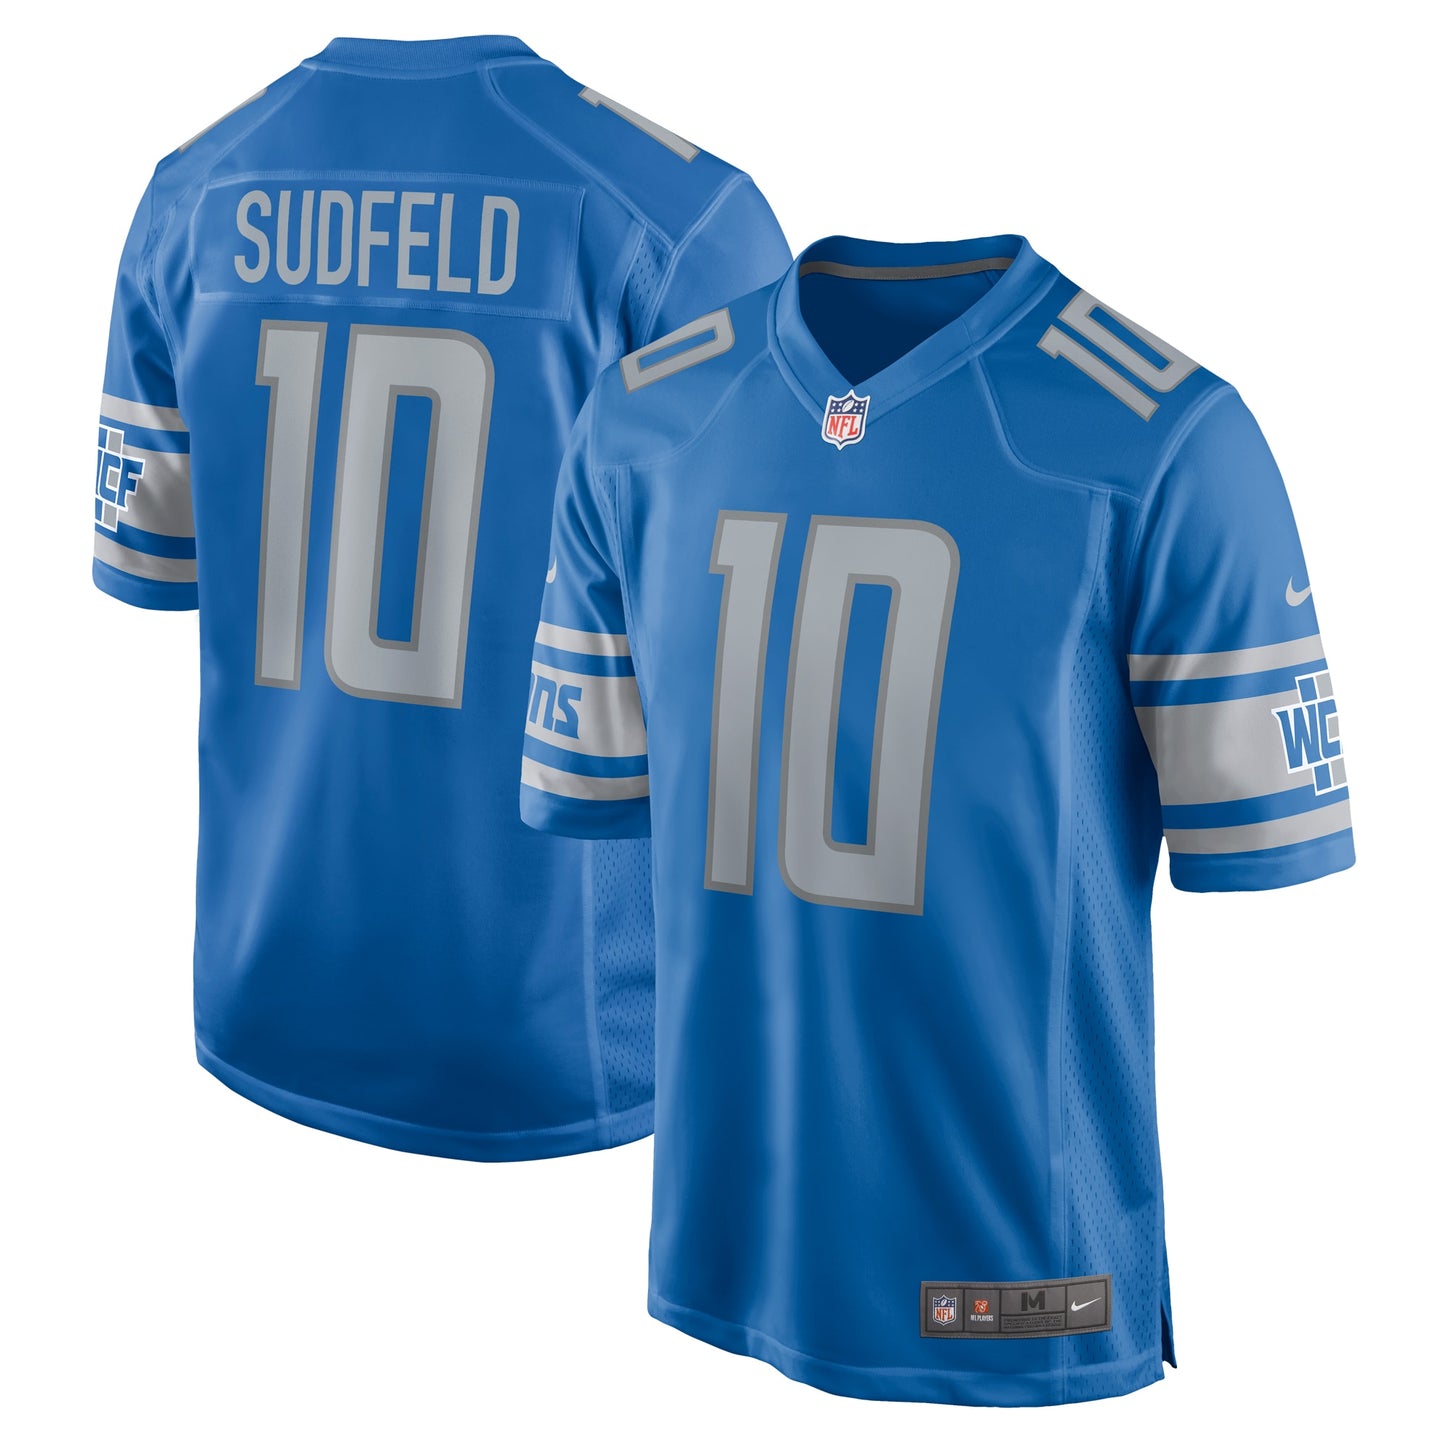 Nate Sudfeld Detroit Lions Nike Home Game Player Jersey - Blue